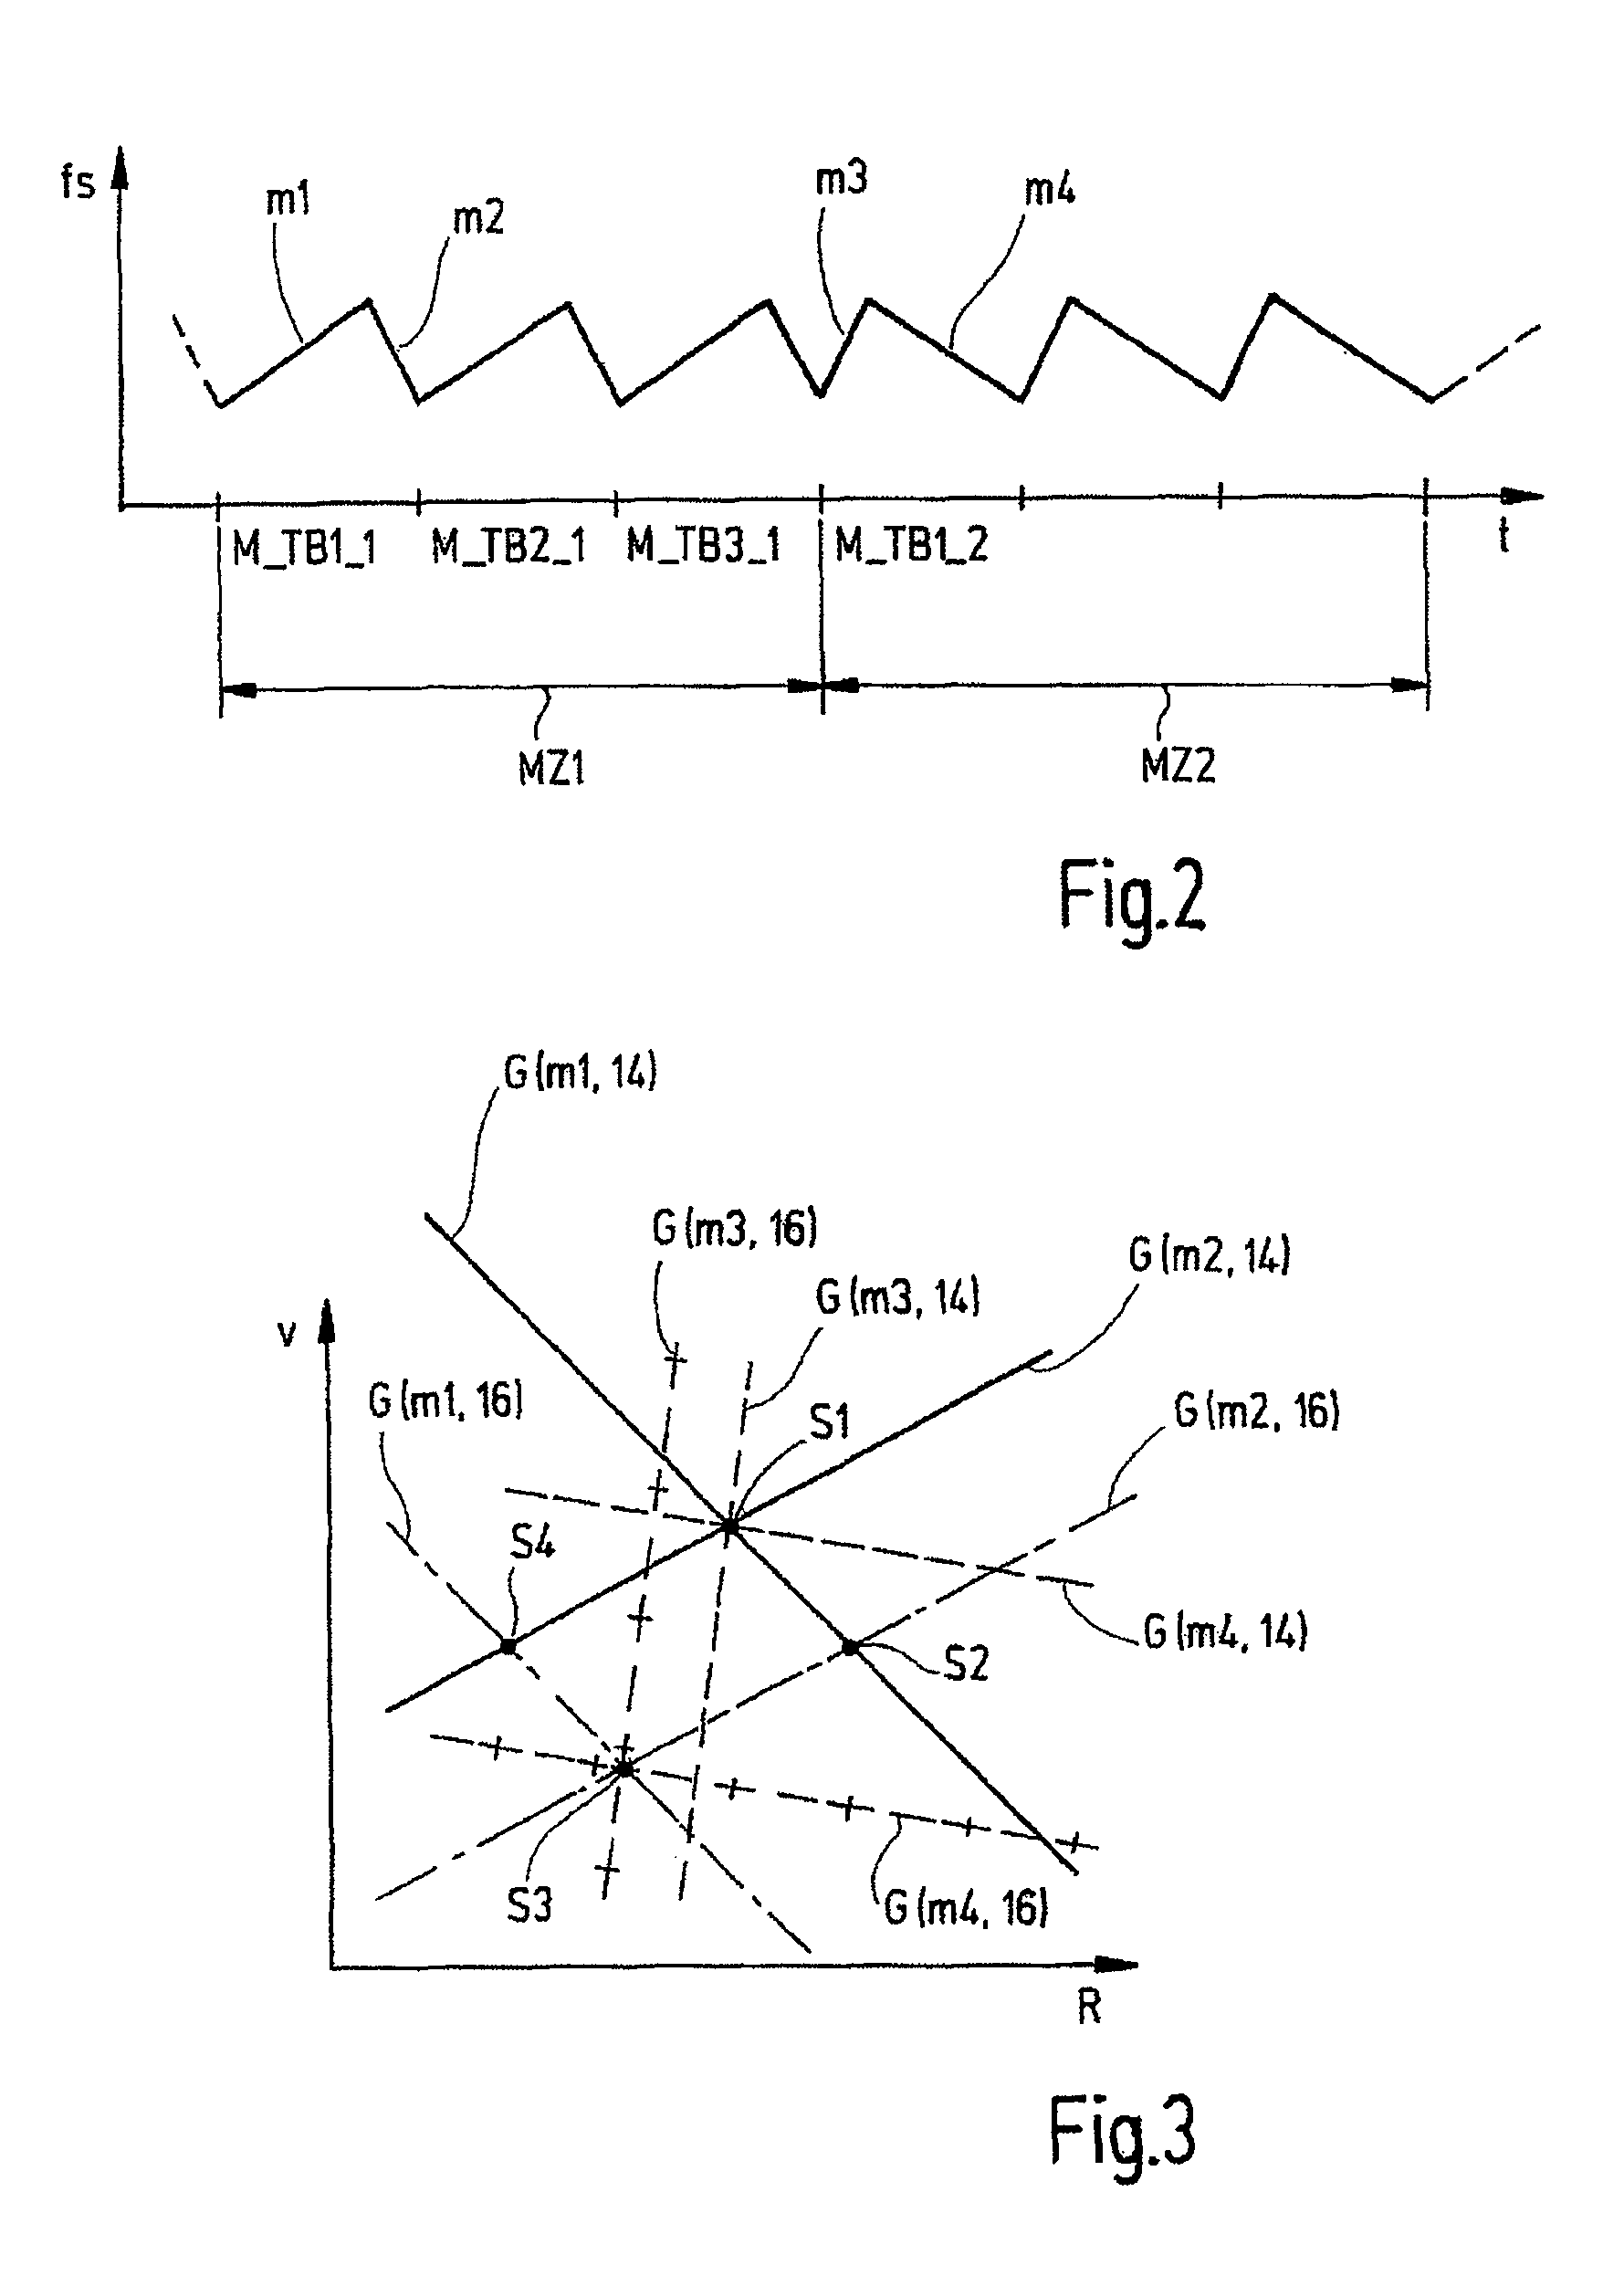 Motor vehicle radar system, and method for determining speeds and distances of objects